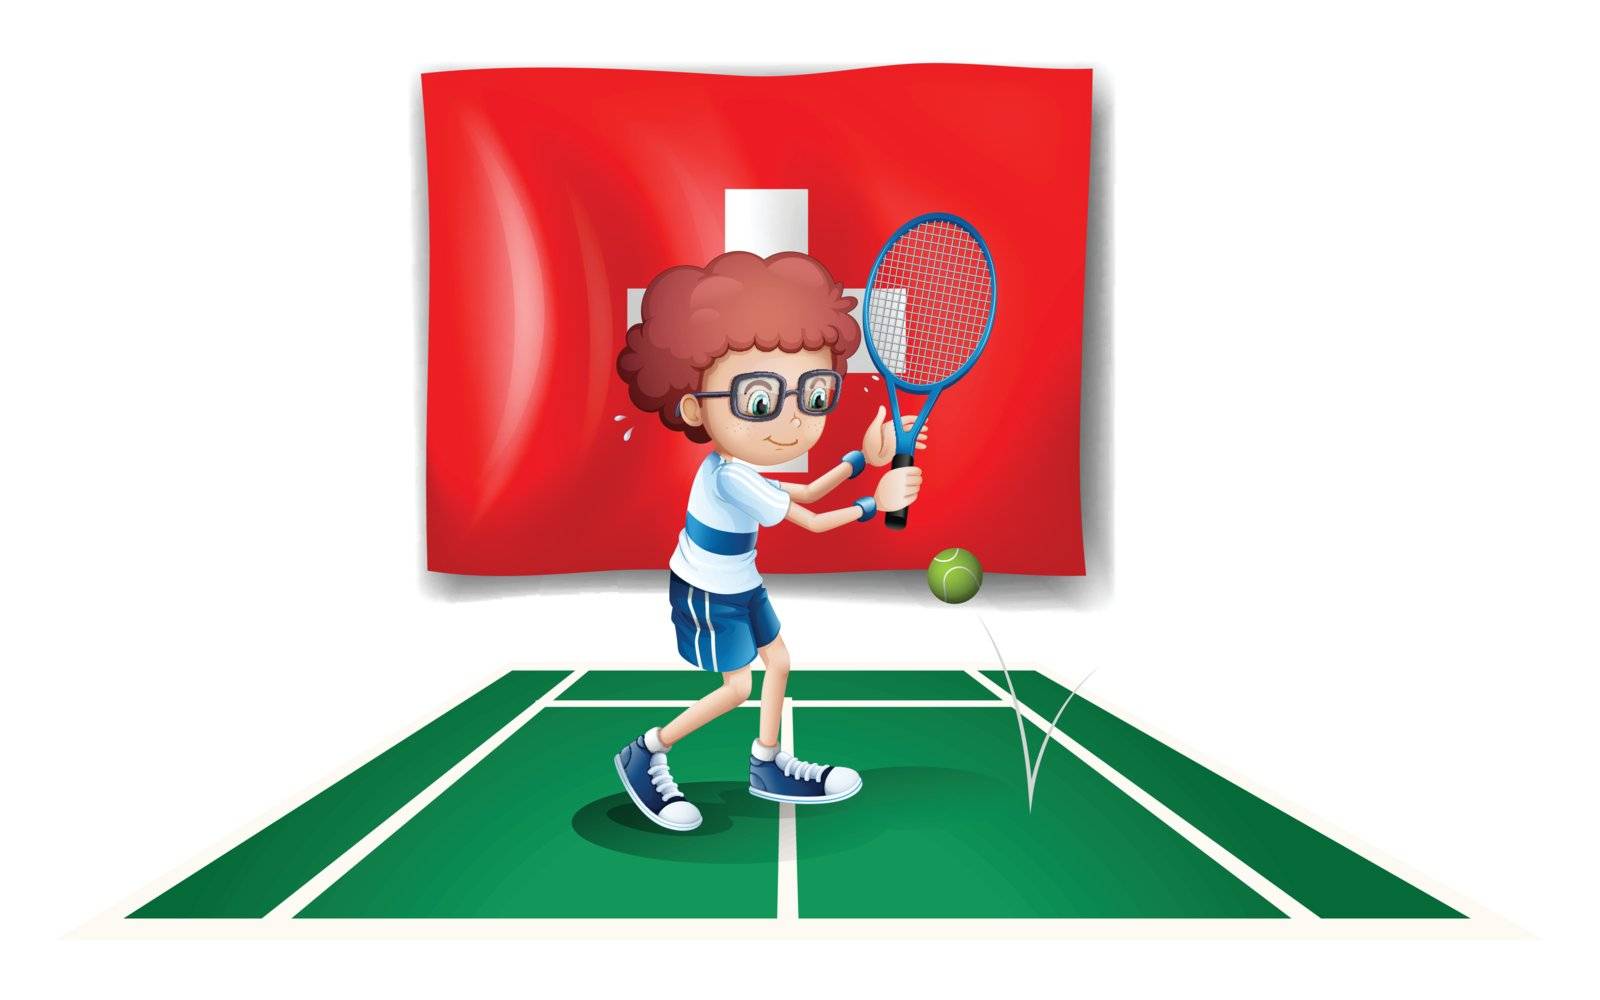 Illustration of a boy playing tennis in front of the Switzerland flag on a white background